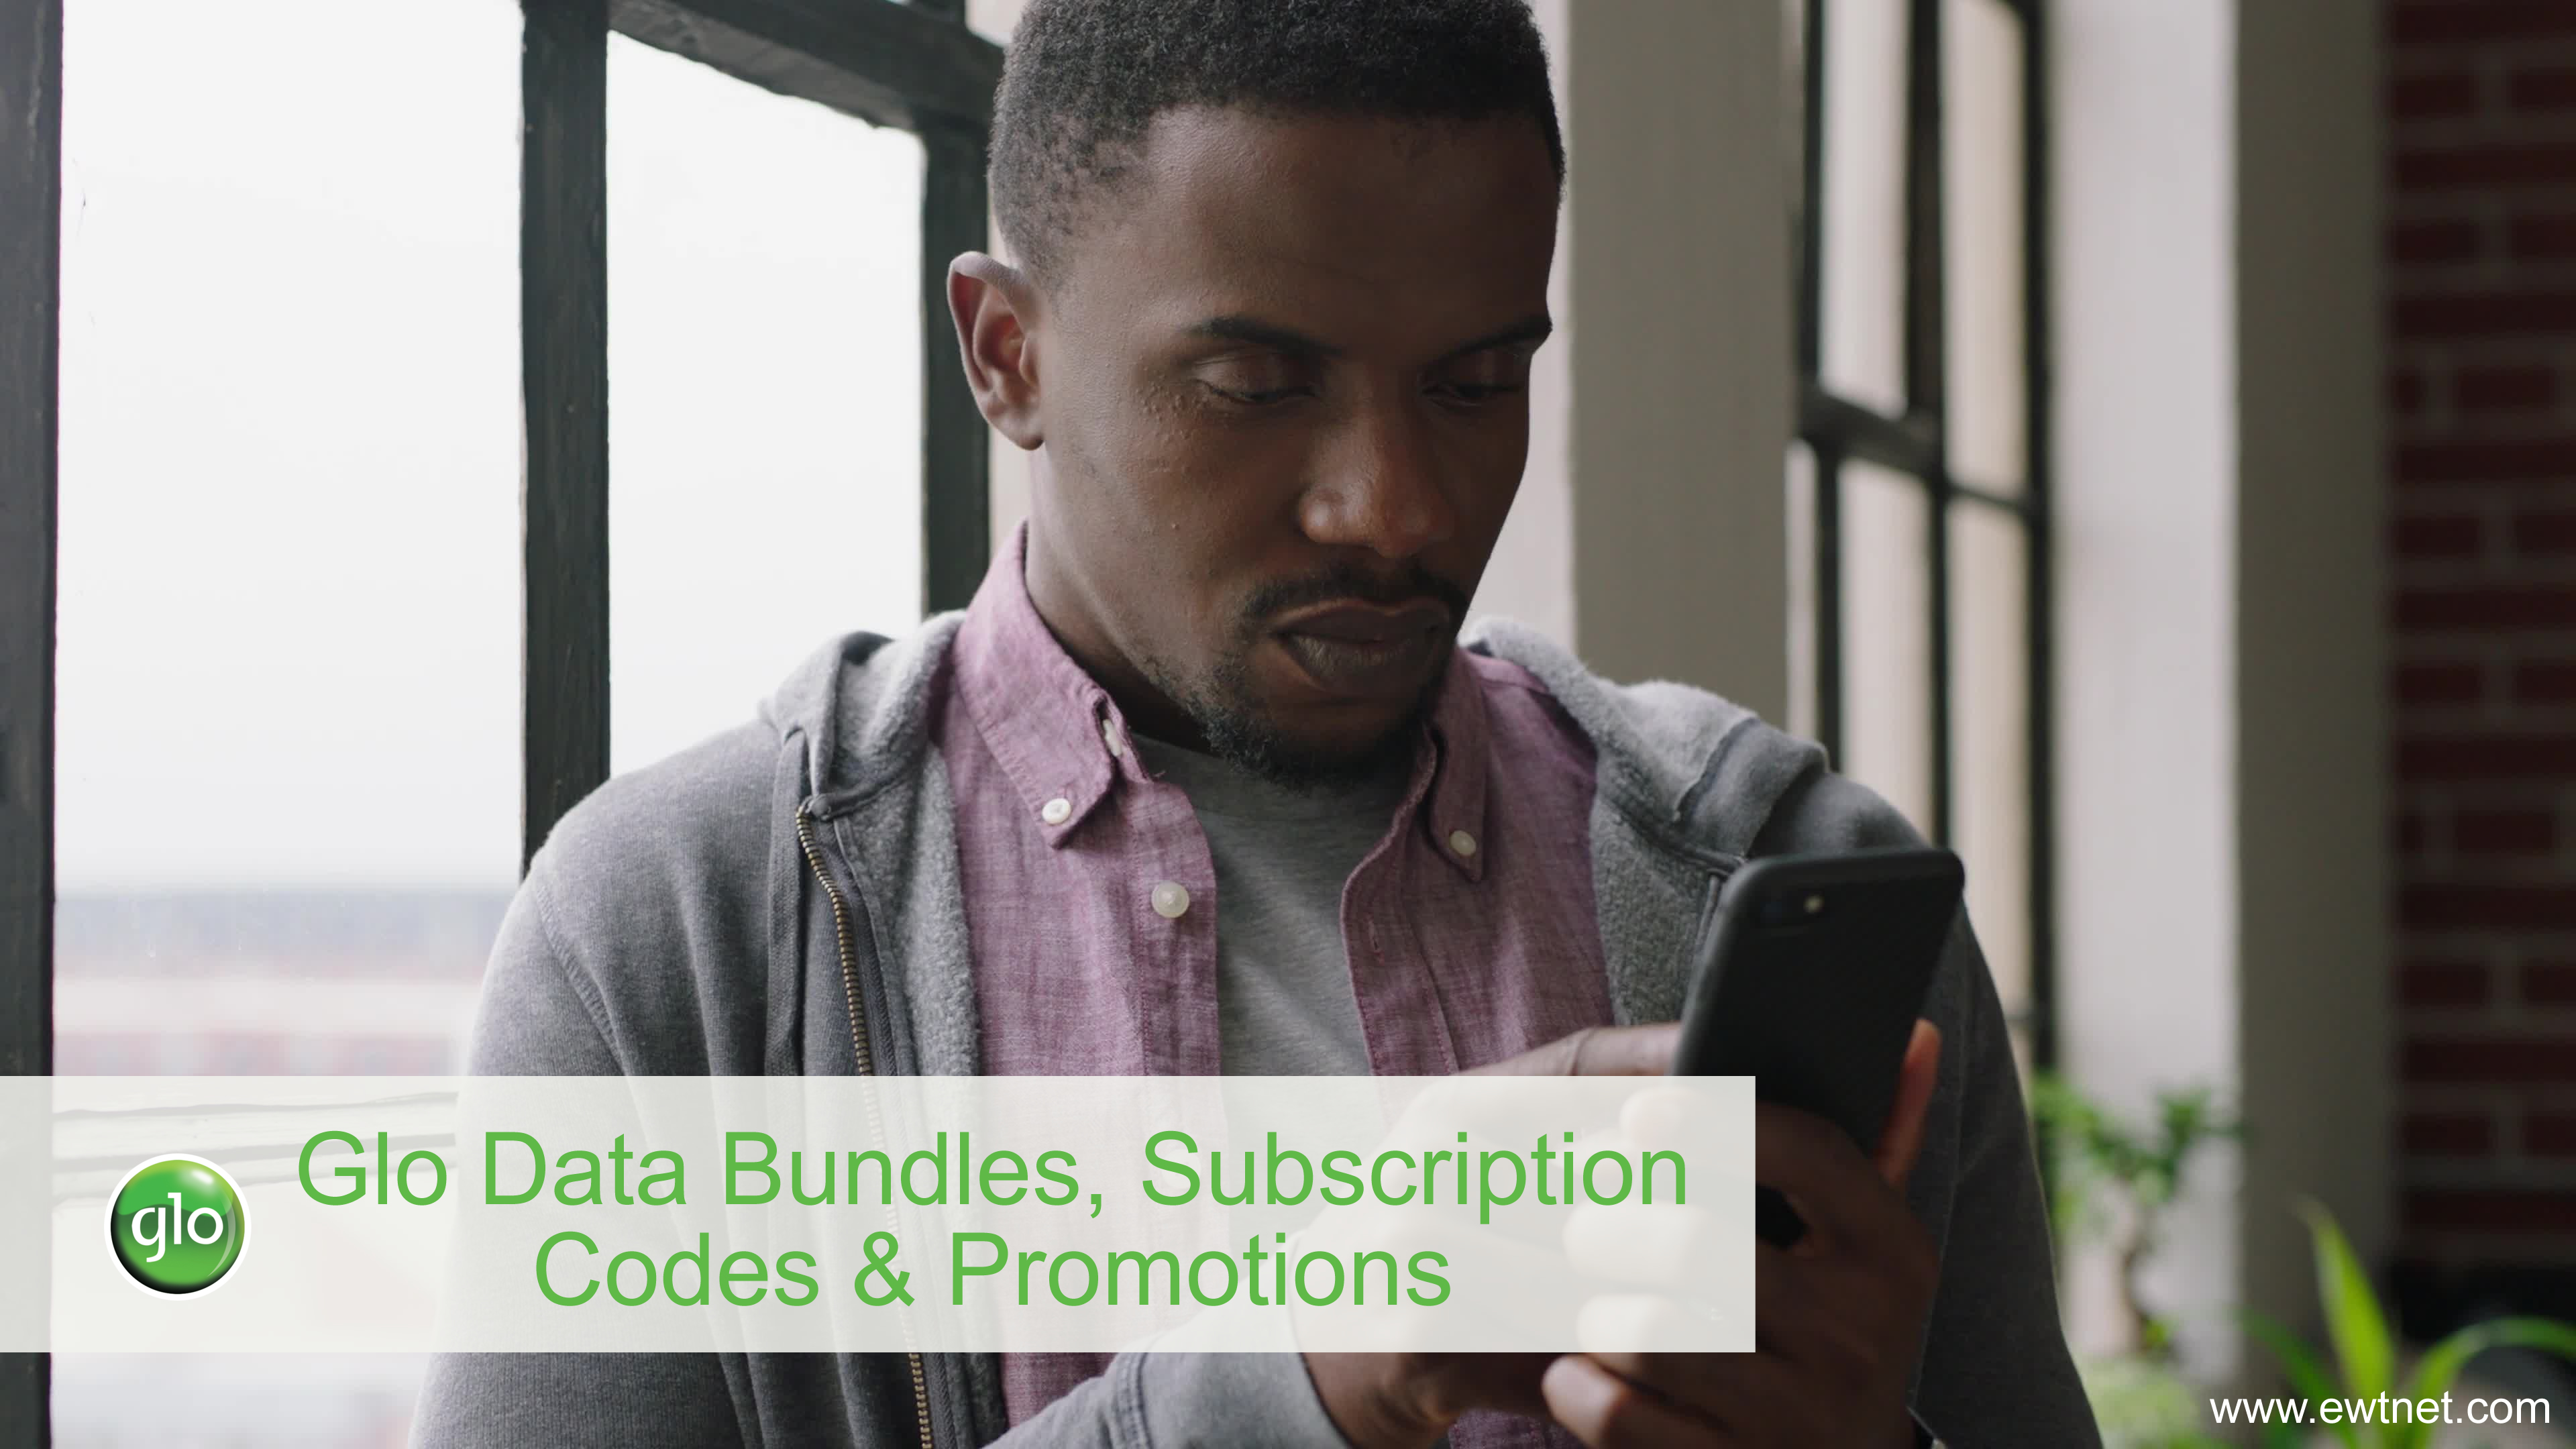 Glo Data Bundles, Subscription Codes and Promotions